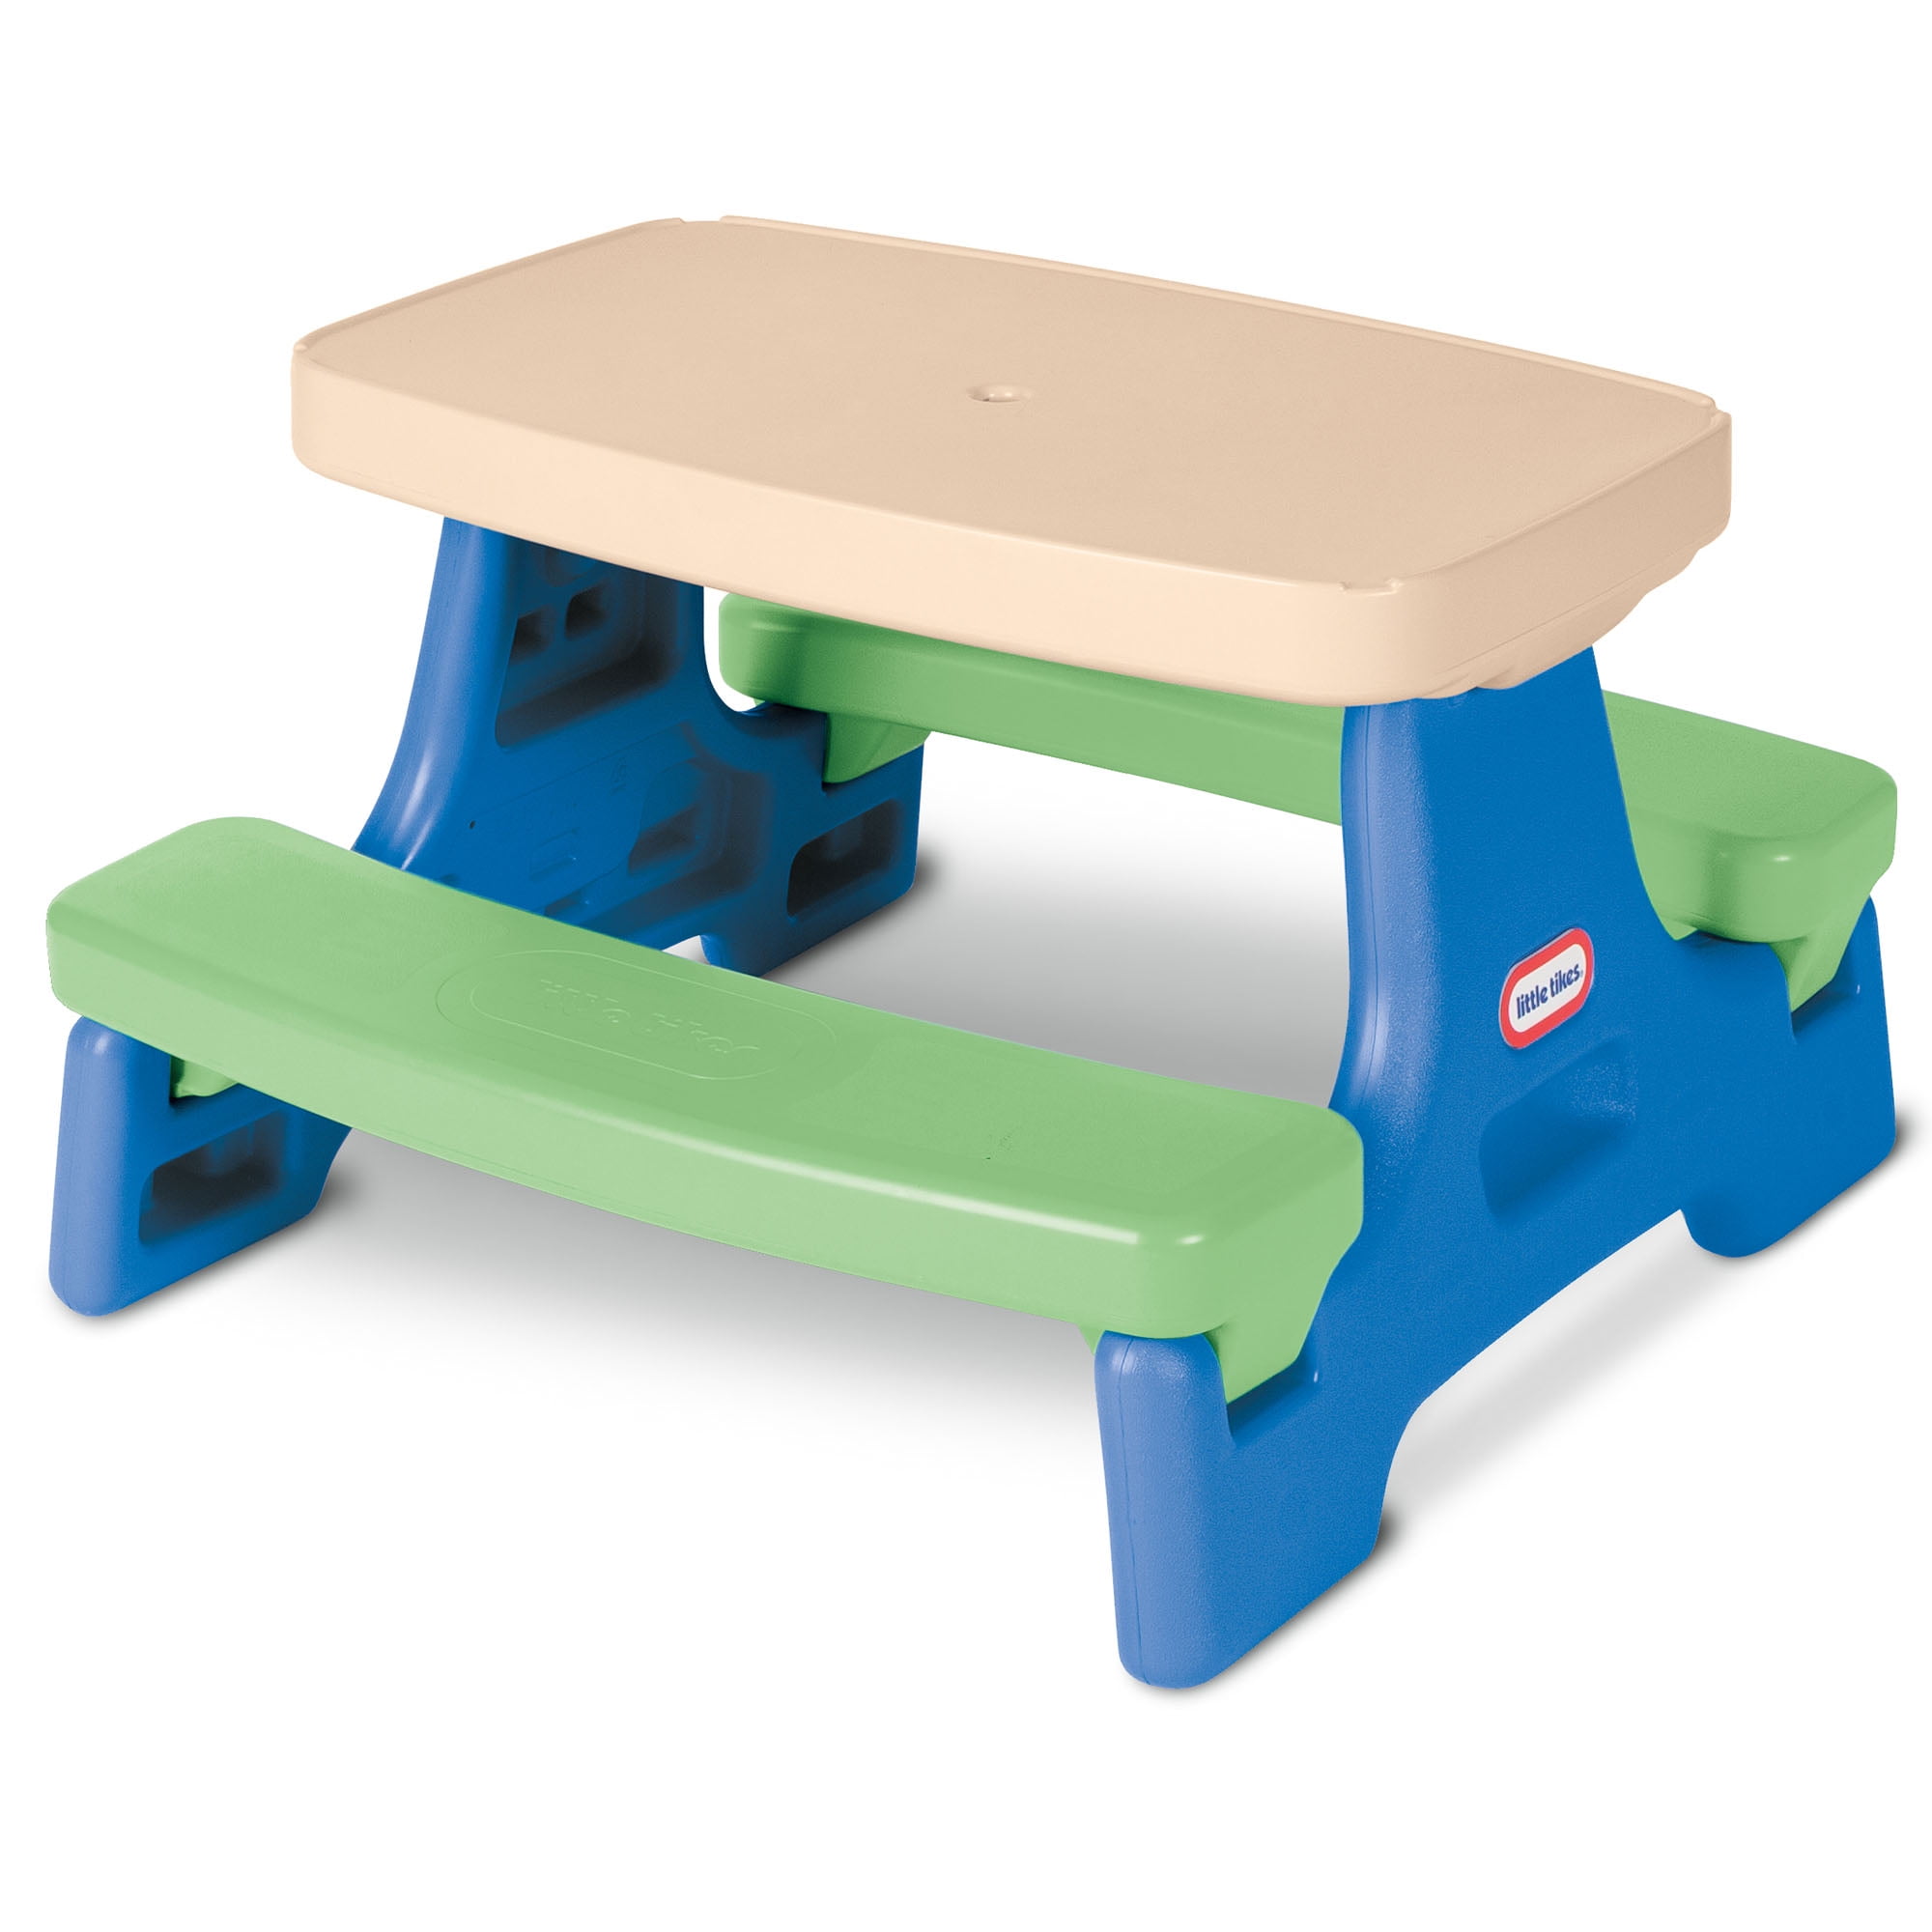 Little Tikes Easy Store Jr. Picnic Table with Umbrella, Blue & Green - Play Table with Umbrella, for Kids - 3